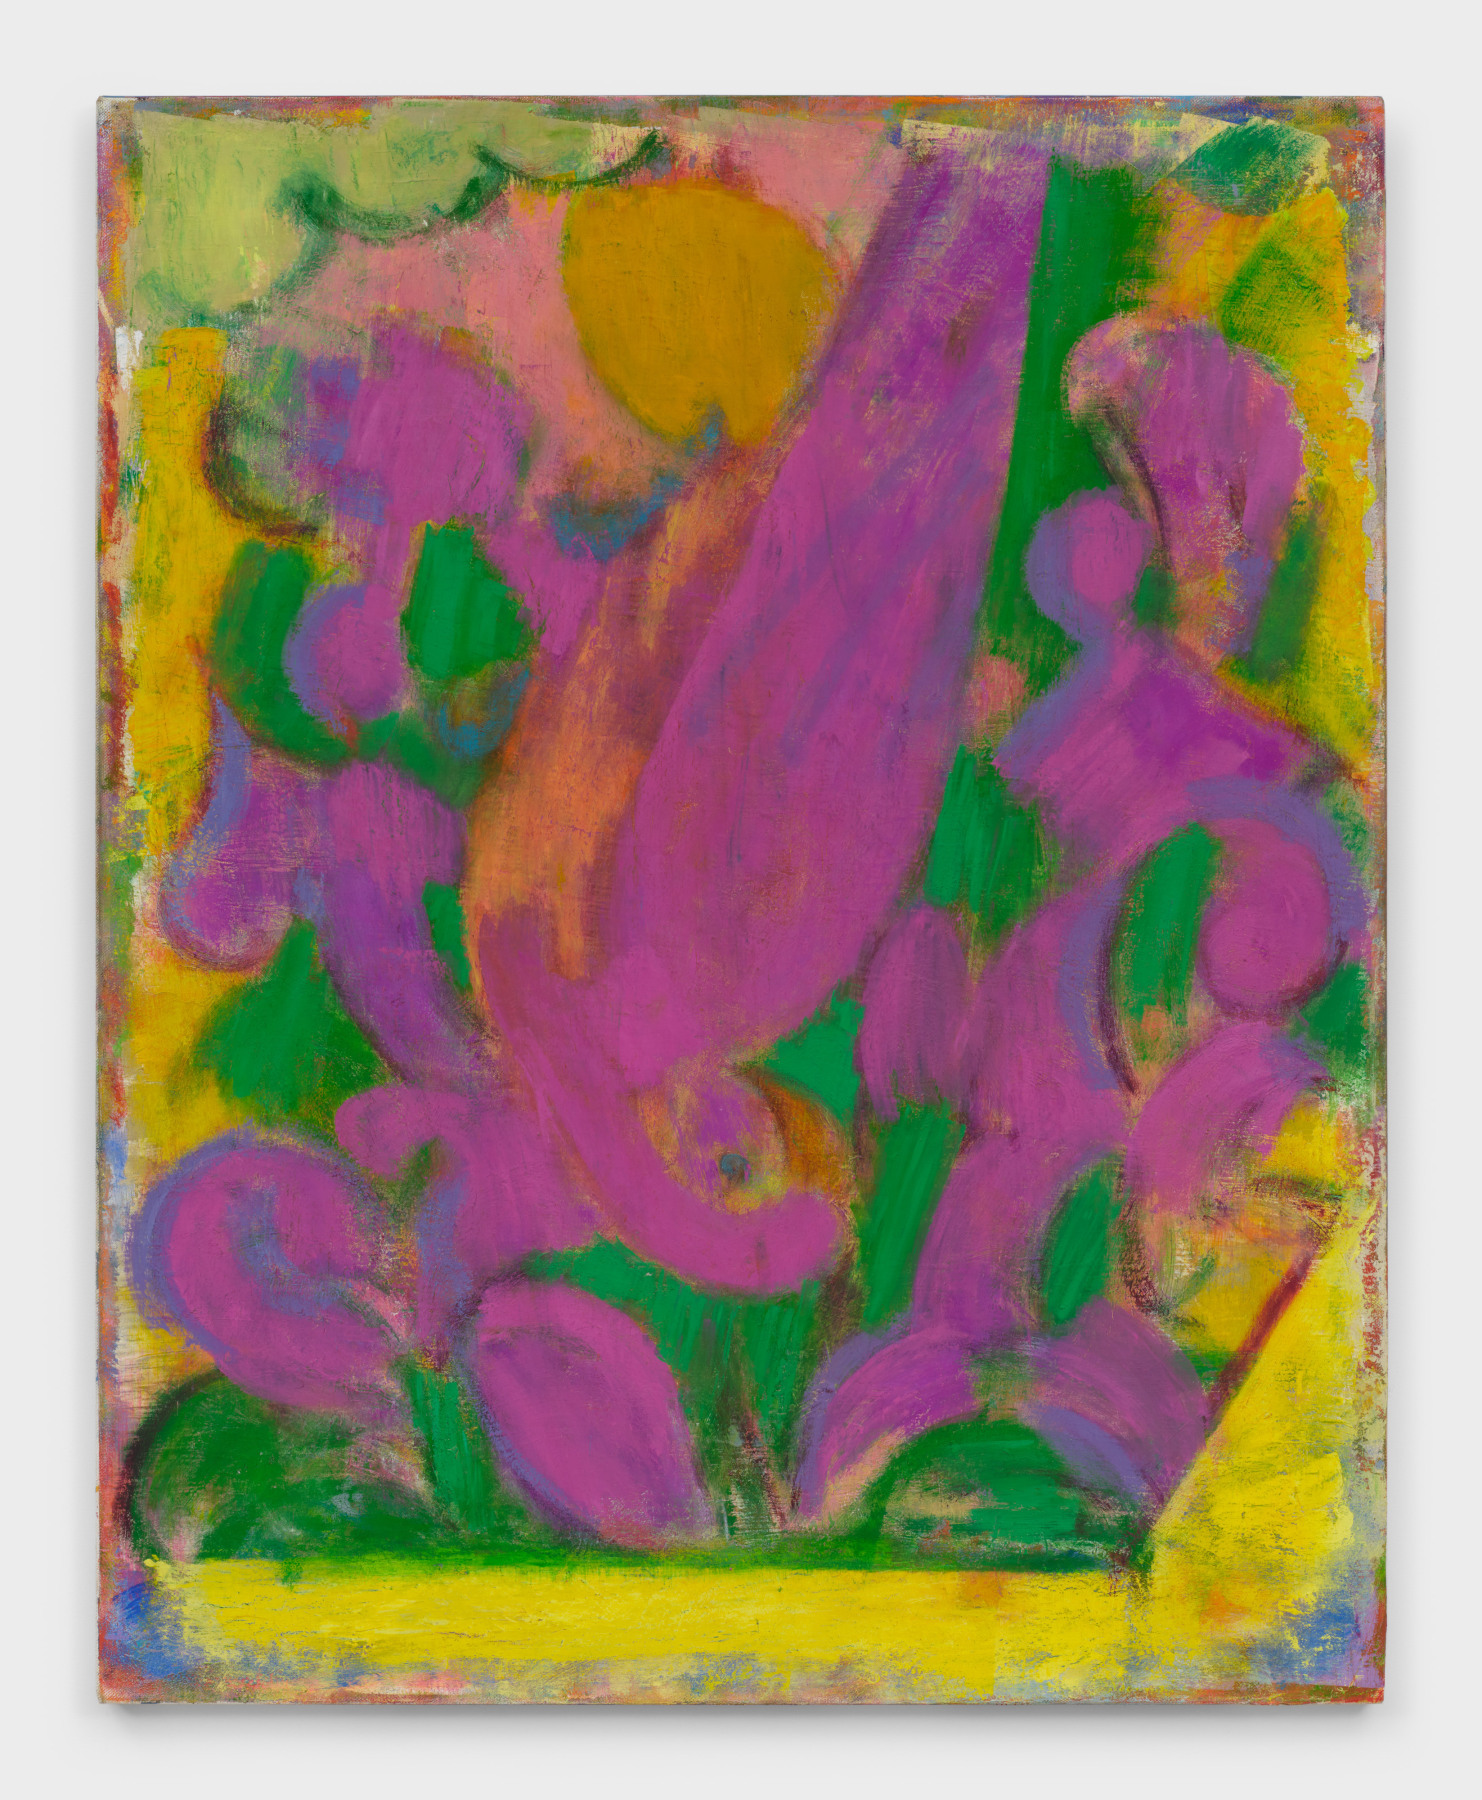 ​​A painting by Michael Berryhill titled "Good Fortune," which shows purple and green shapes against a yellow background